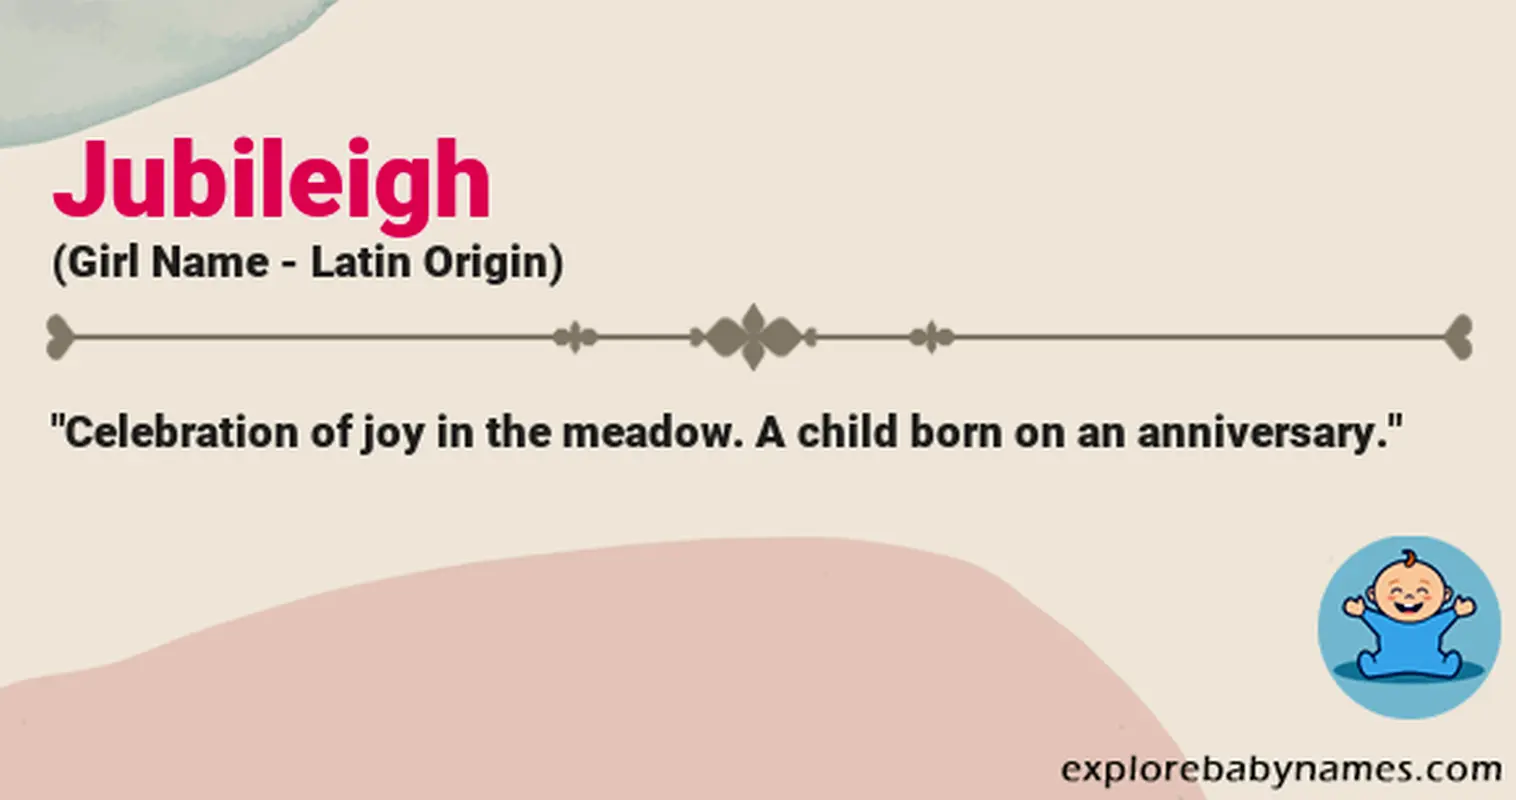 Meaning of Jubileigh